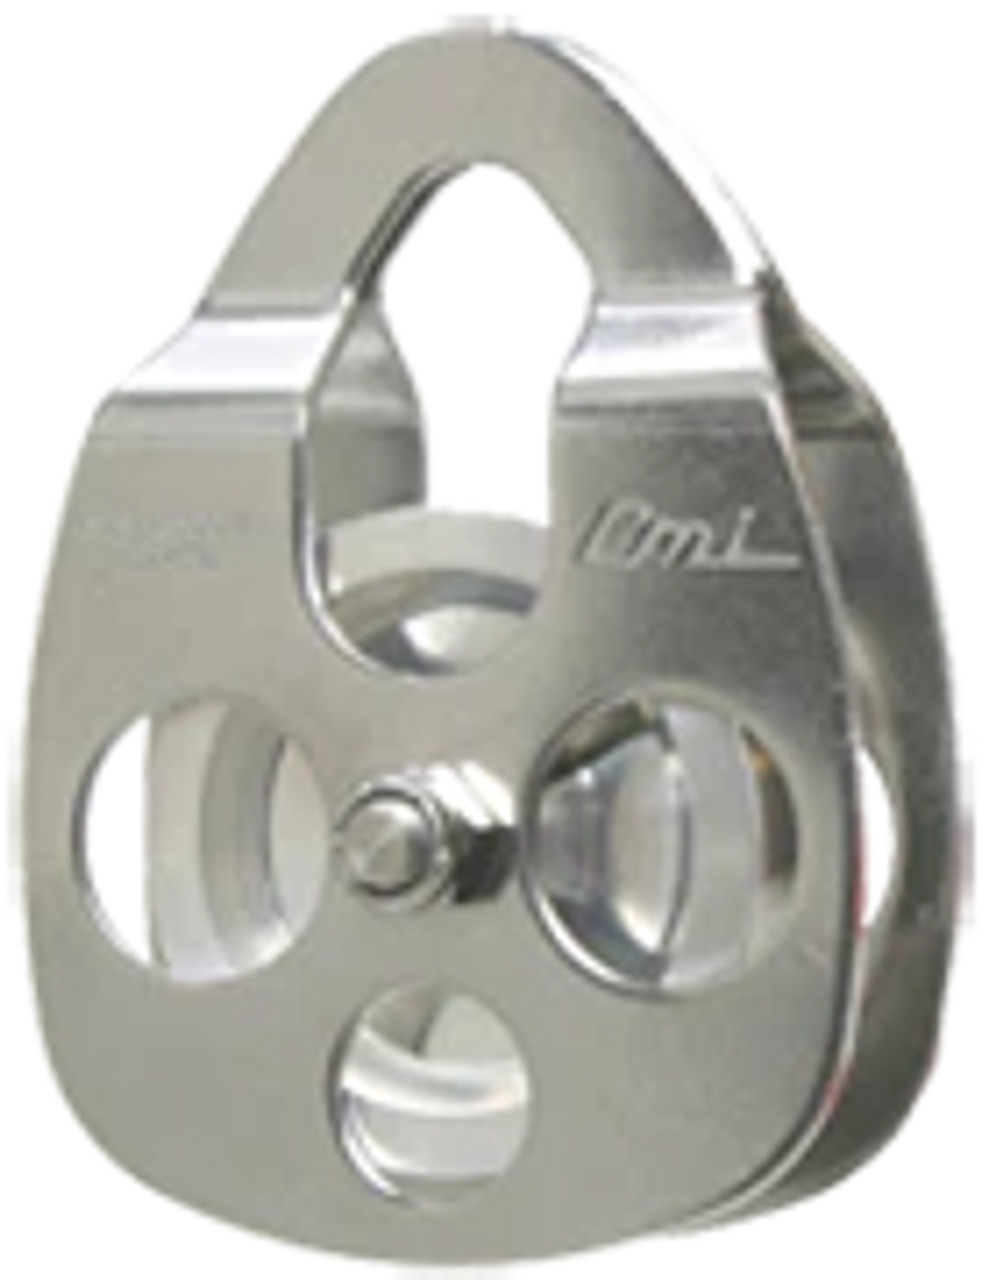 CMI RP104 2 3/8*' Pulley